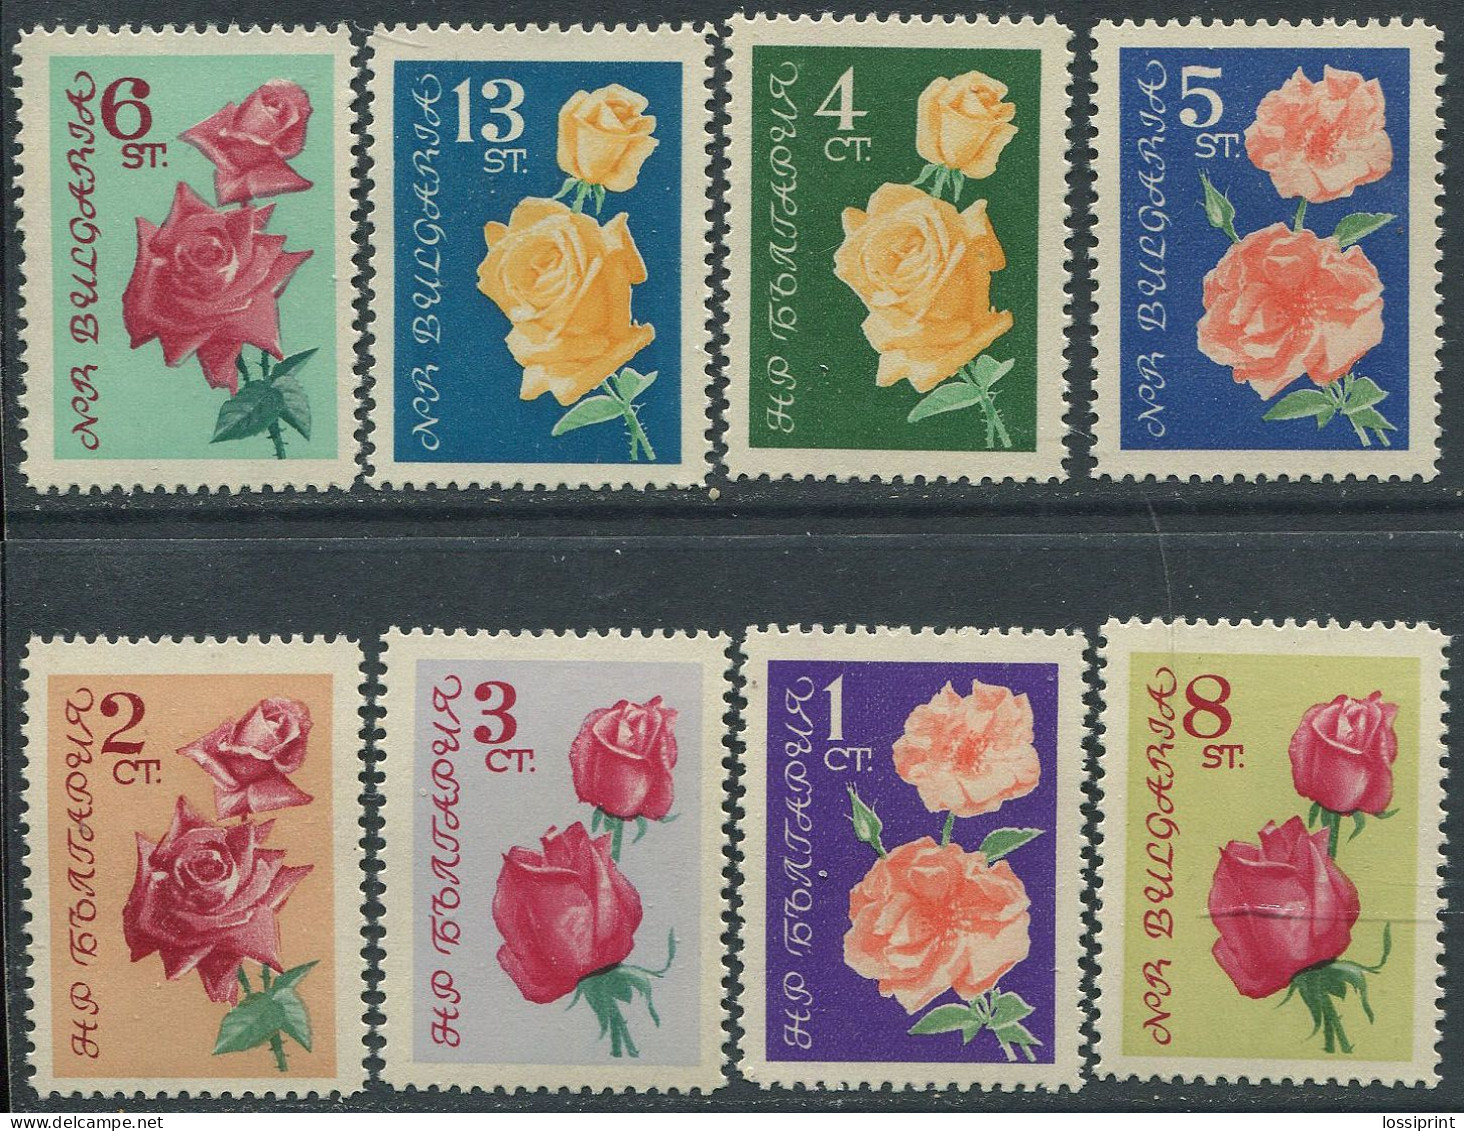 Bulgaria:Unused Stamps Serie Flowers, Roses, 1962, MNH - Roses